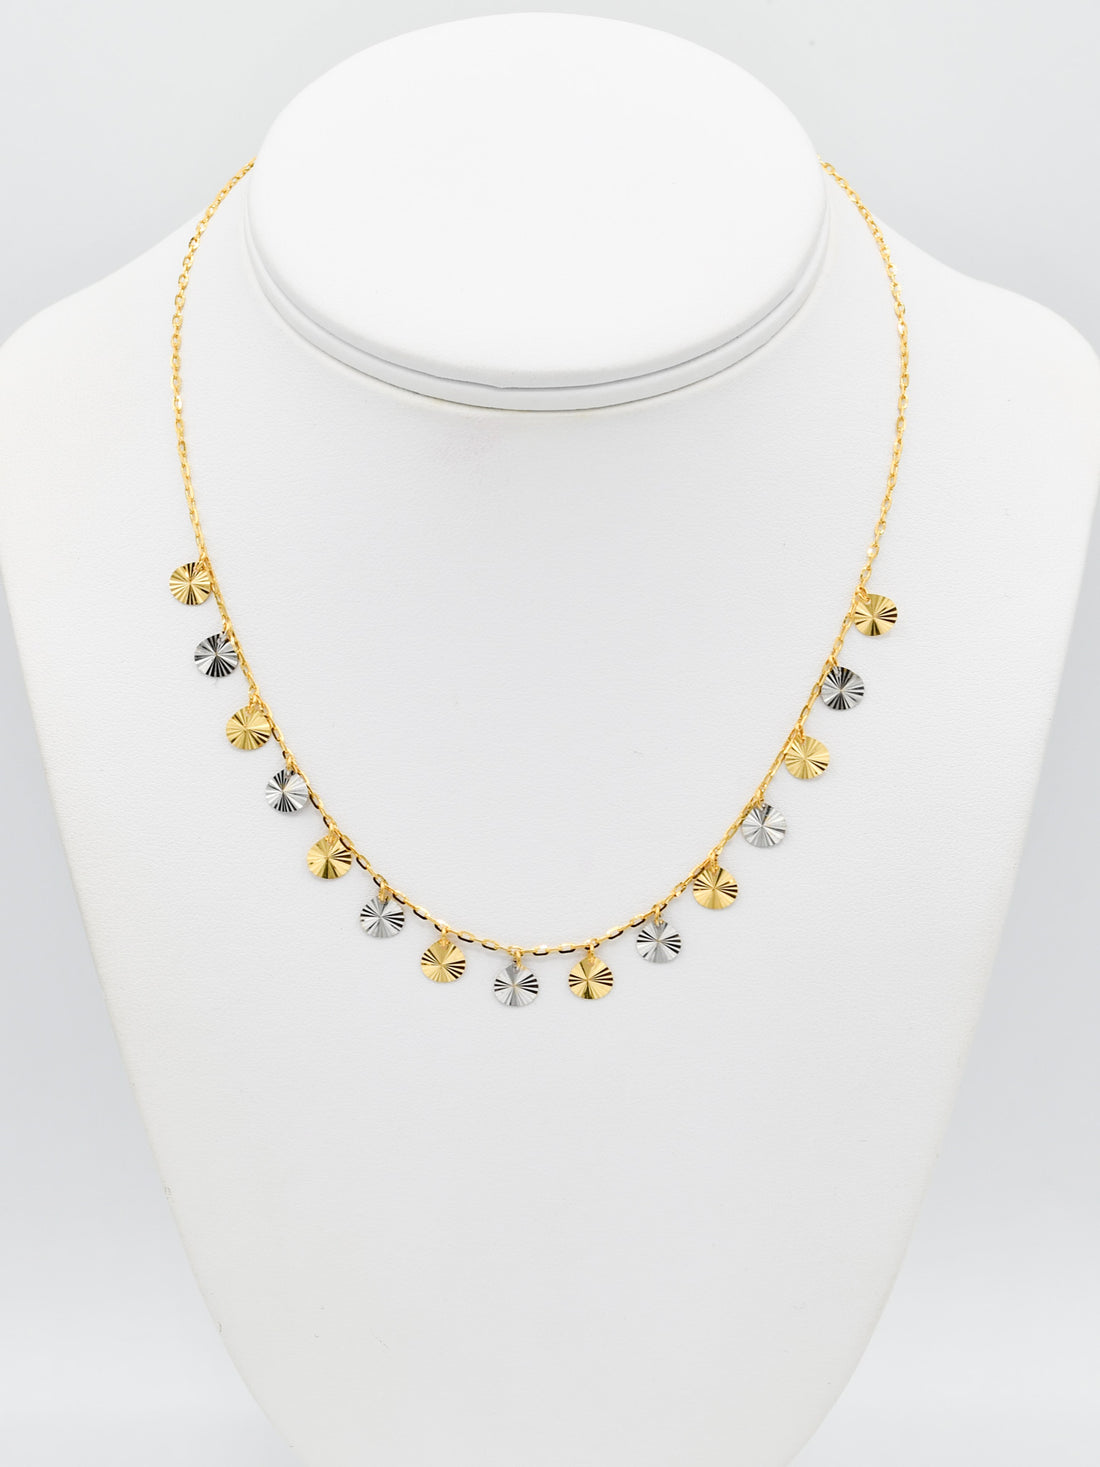 22ct Gold Two Tone Charms Necklace Set